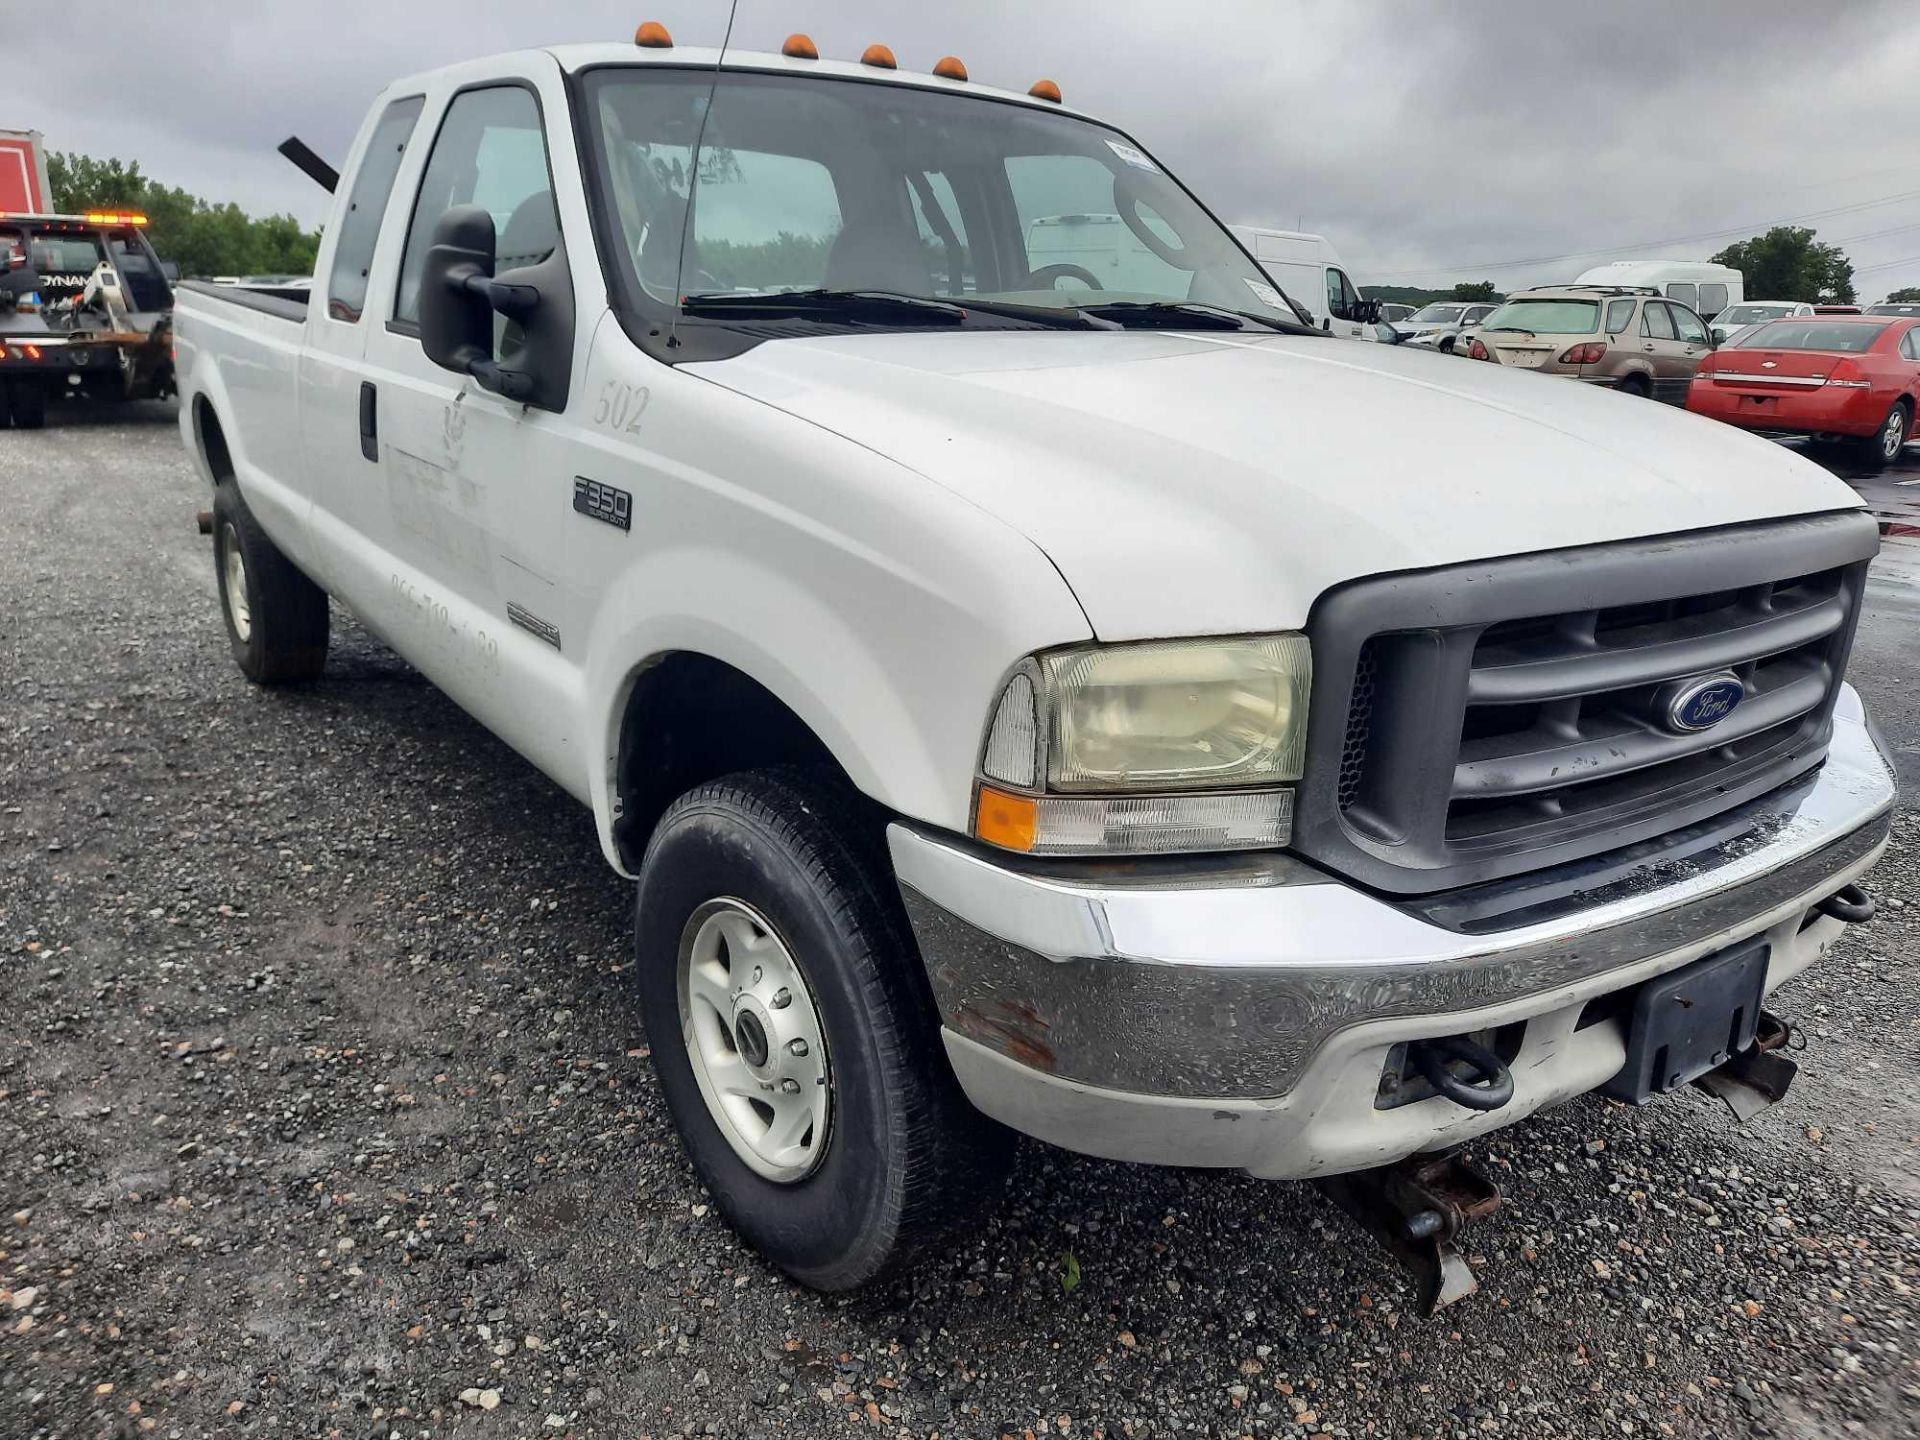 2003 Ford F350 XL Super Duty 4x4 (INOP) - Image 2 of 12